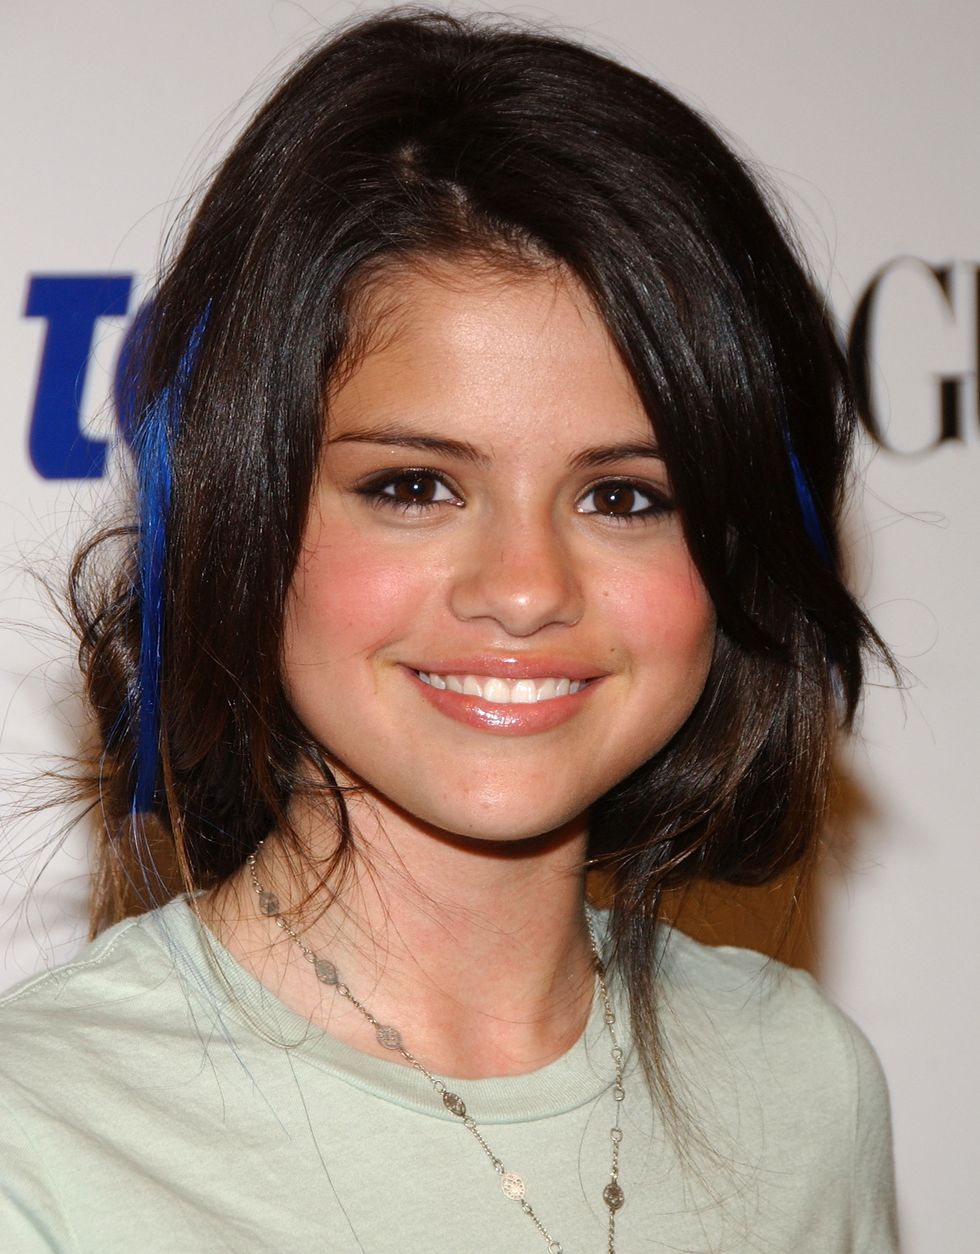 selena gomez at the 2007 teen vogue young hollywood party